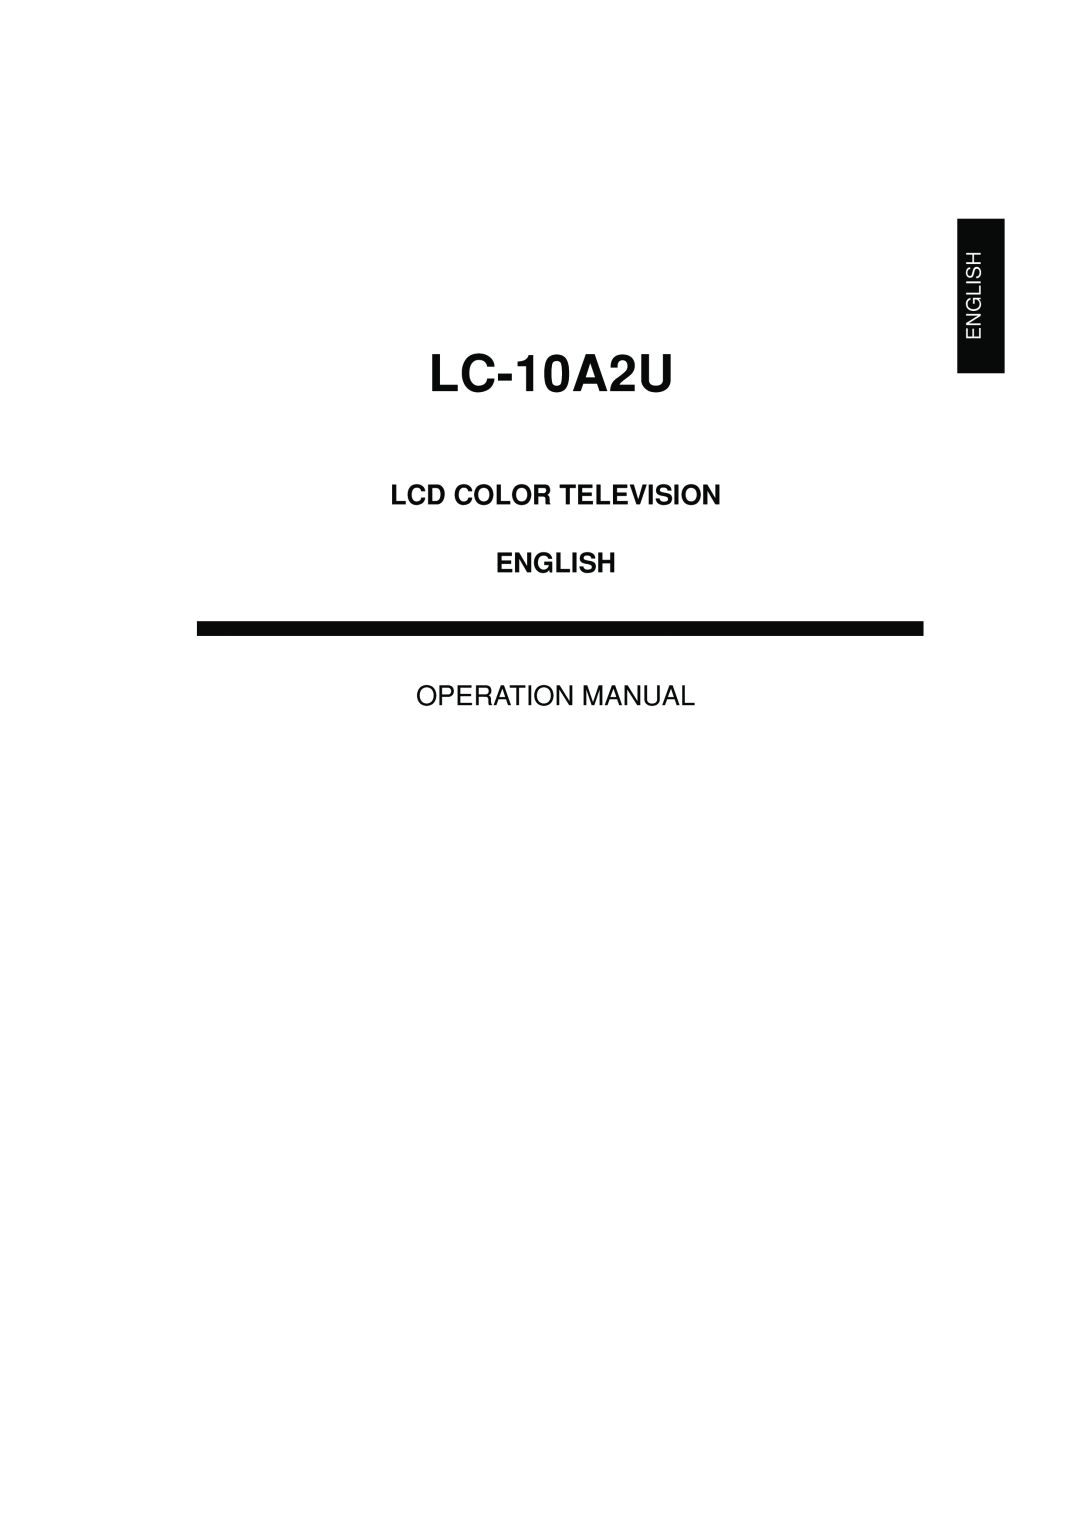 Sharp LC 10A2U operation manual Lcd Color Television English, Operation Manual, LC-10A2U 